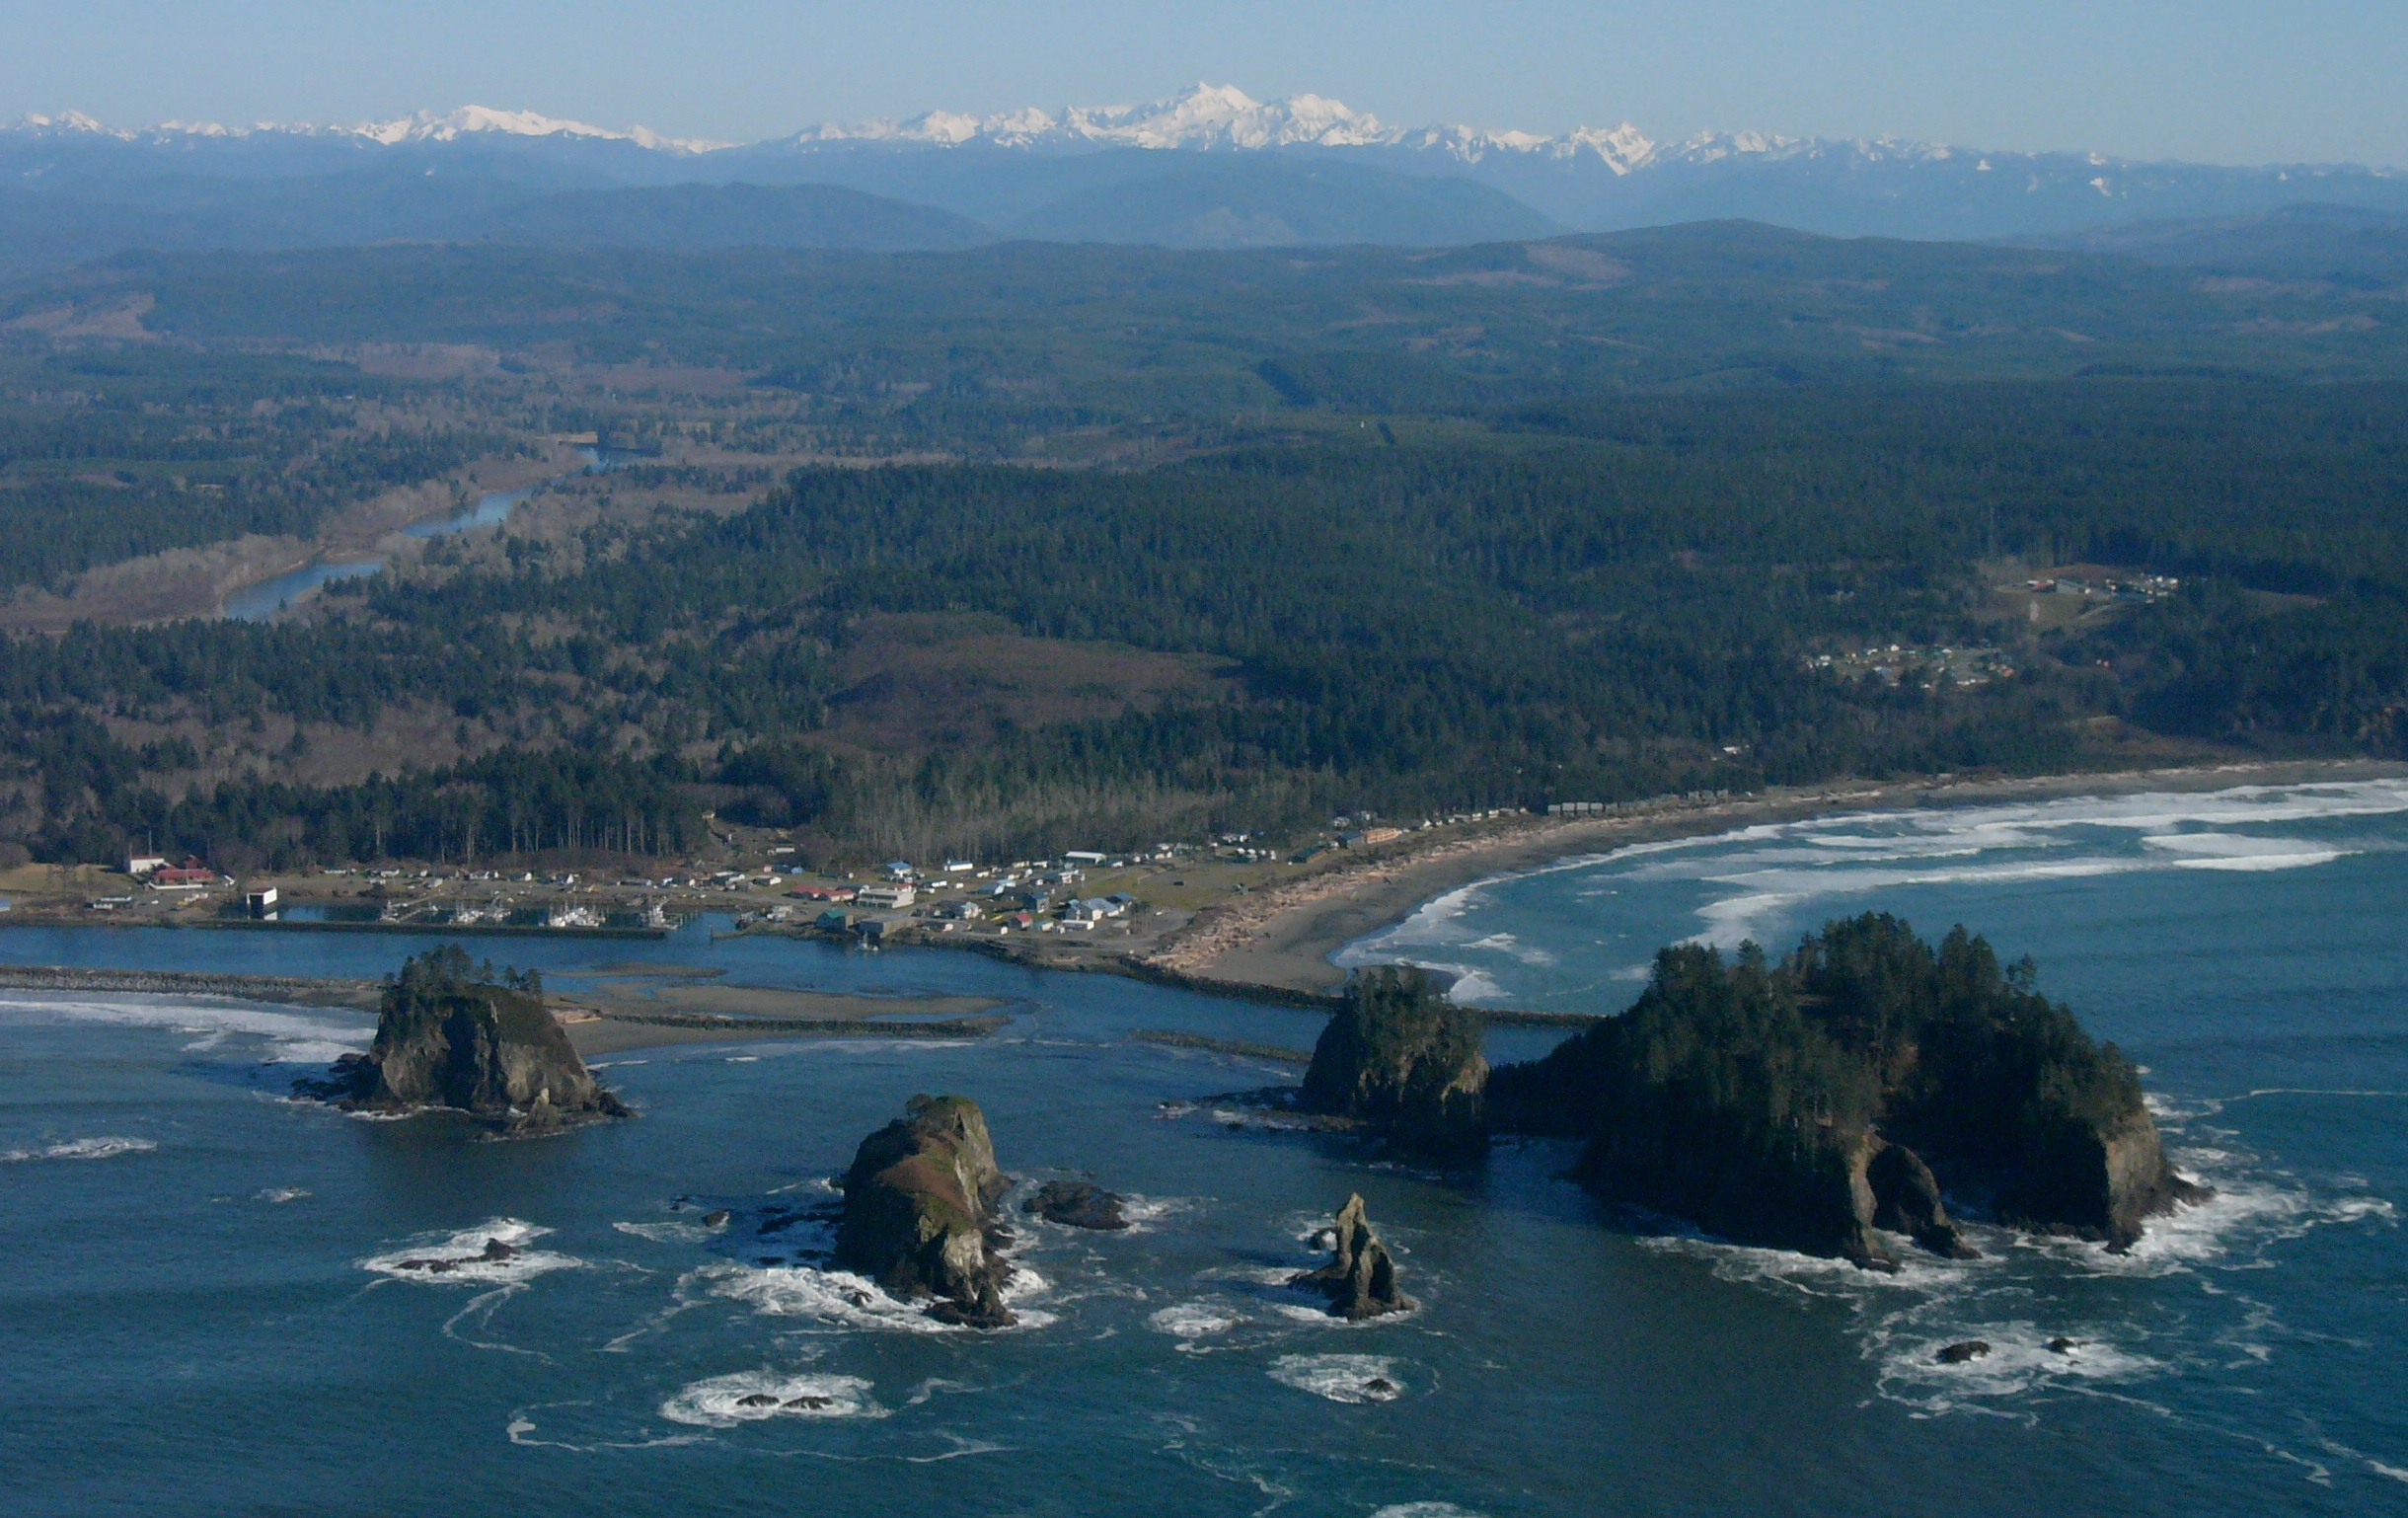 Quileute Tribe starts process to move village to safer ground in Washington